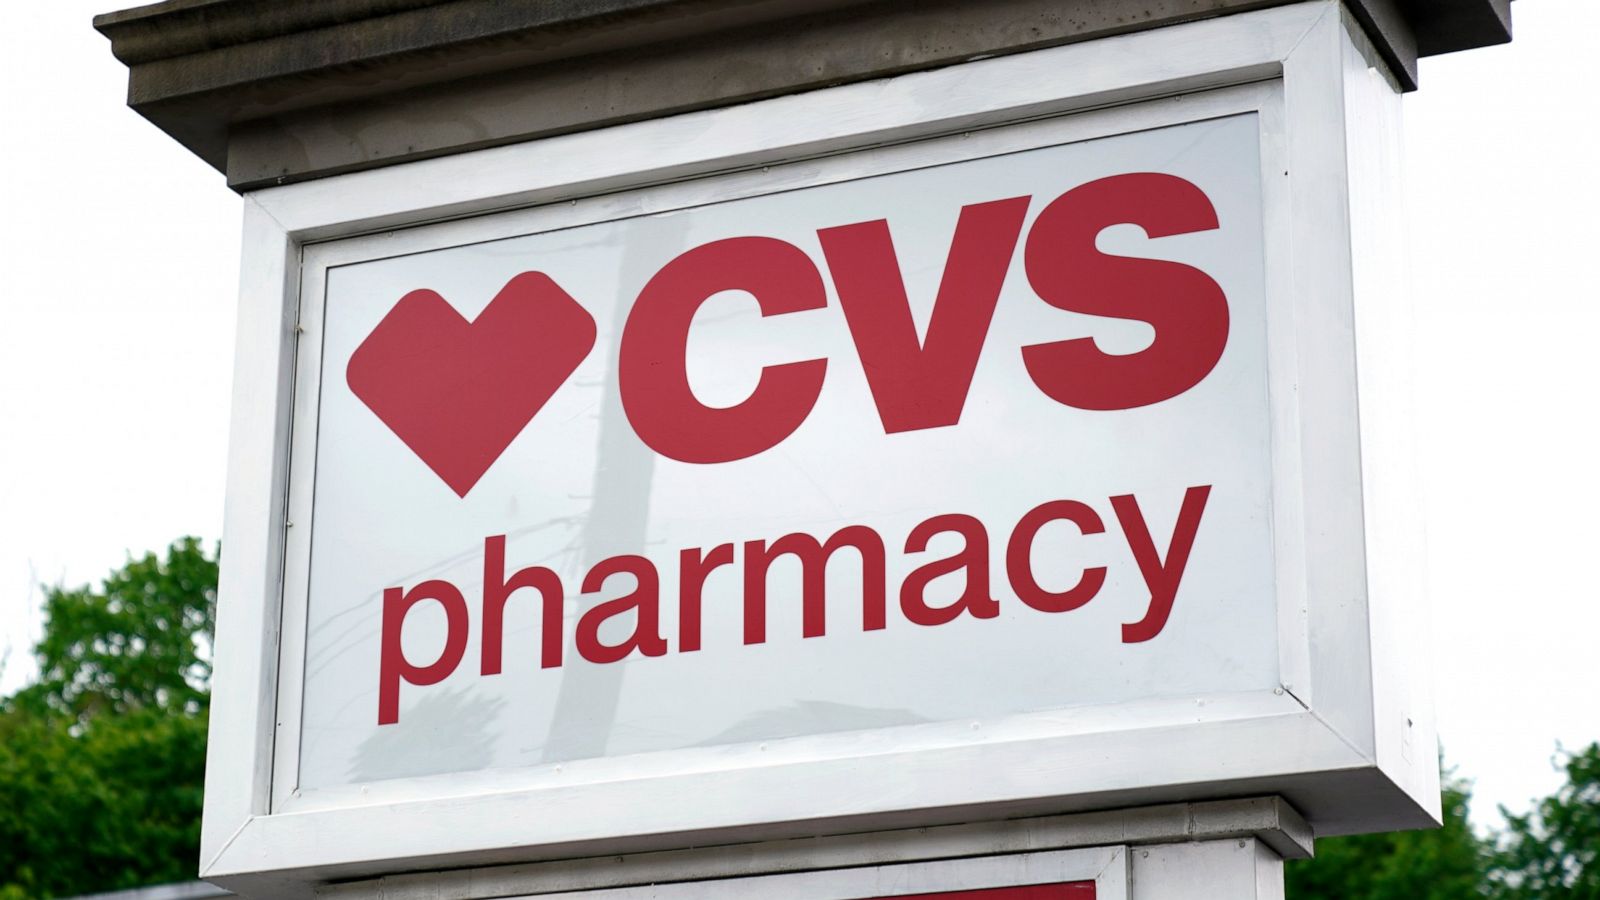 Does CVS Sell Flowers In 2022? (Types, Prices + Locations)